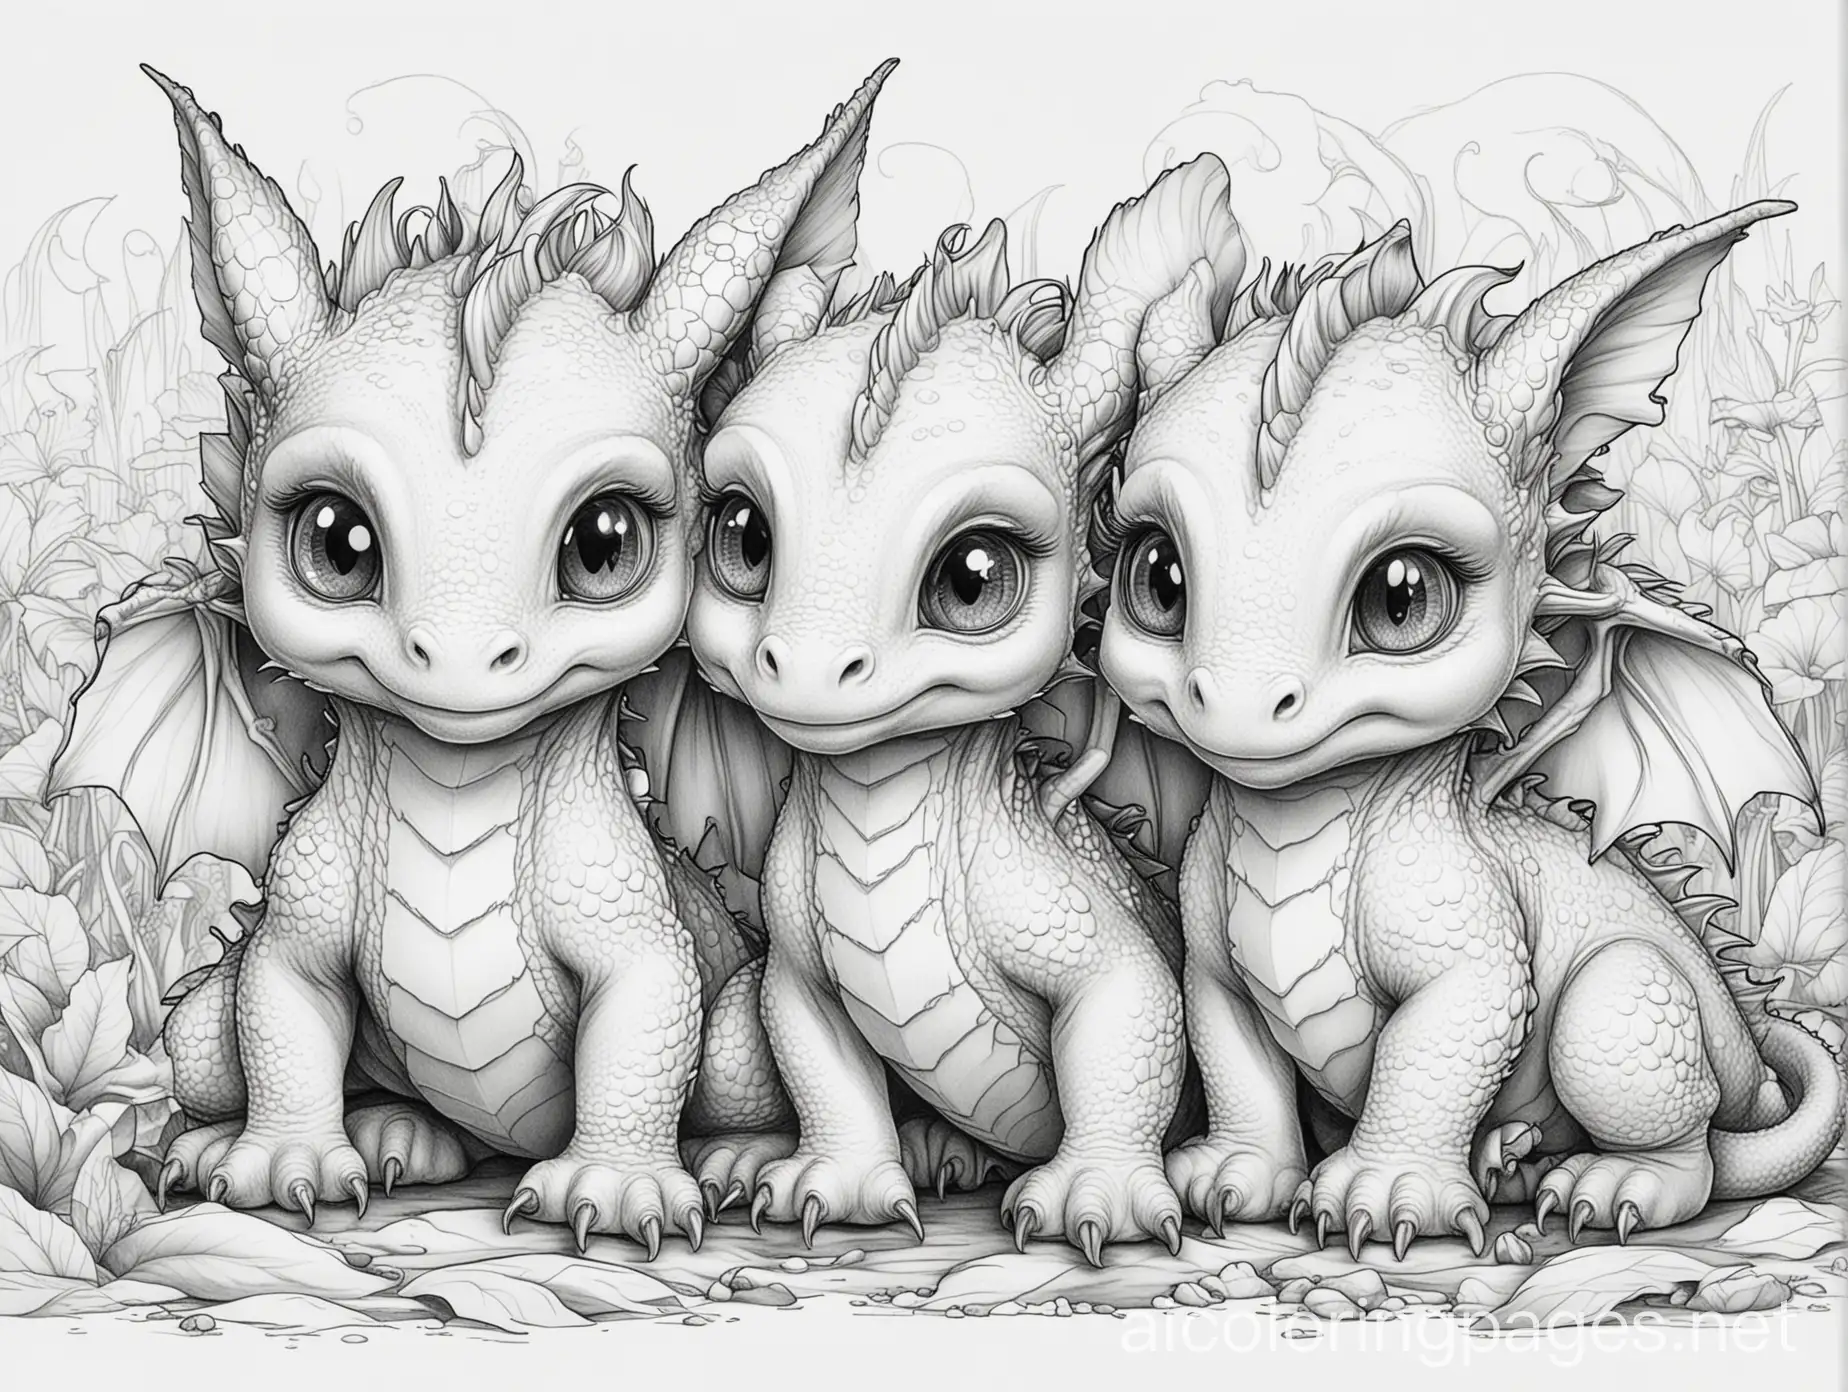 cute baby dragons
high detail
line art
black and white
adult coloring book
, Coloring Page, black and white, line art, white background, Simplicity, Ample White Space. The background of the coloring page is plain white to make it easy for young children to color within the lines. The outlines of all the subjects are easy to distinguish, making it simple for kids to color without too much difficulty